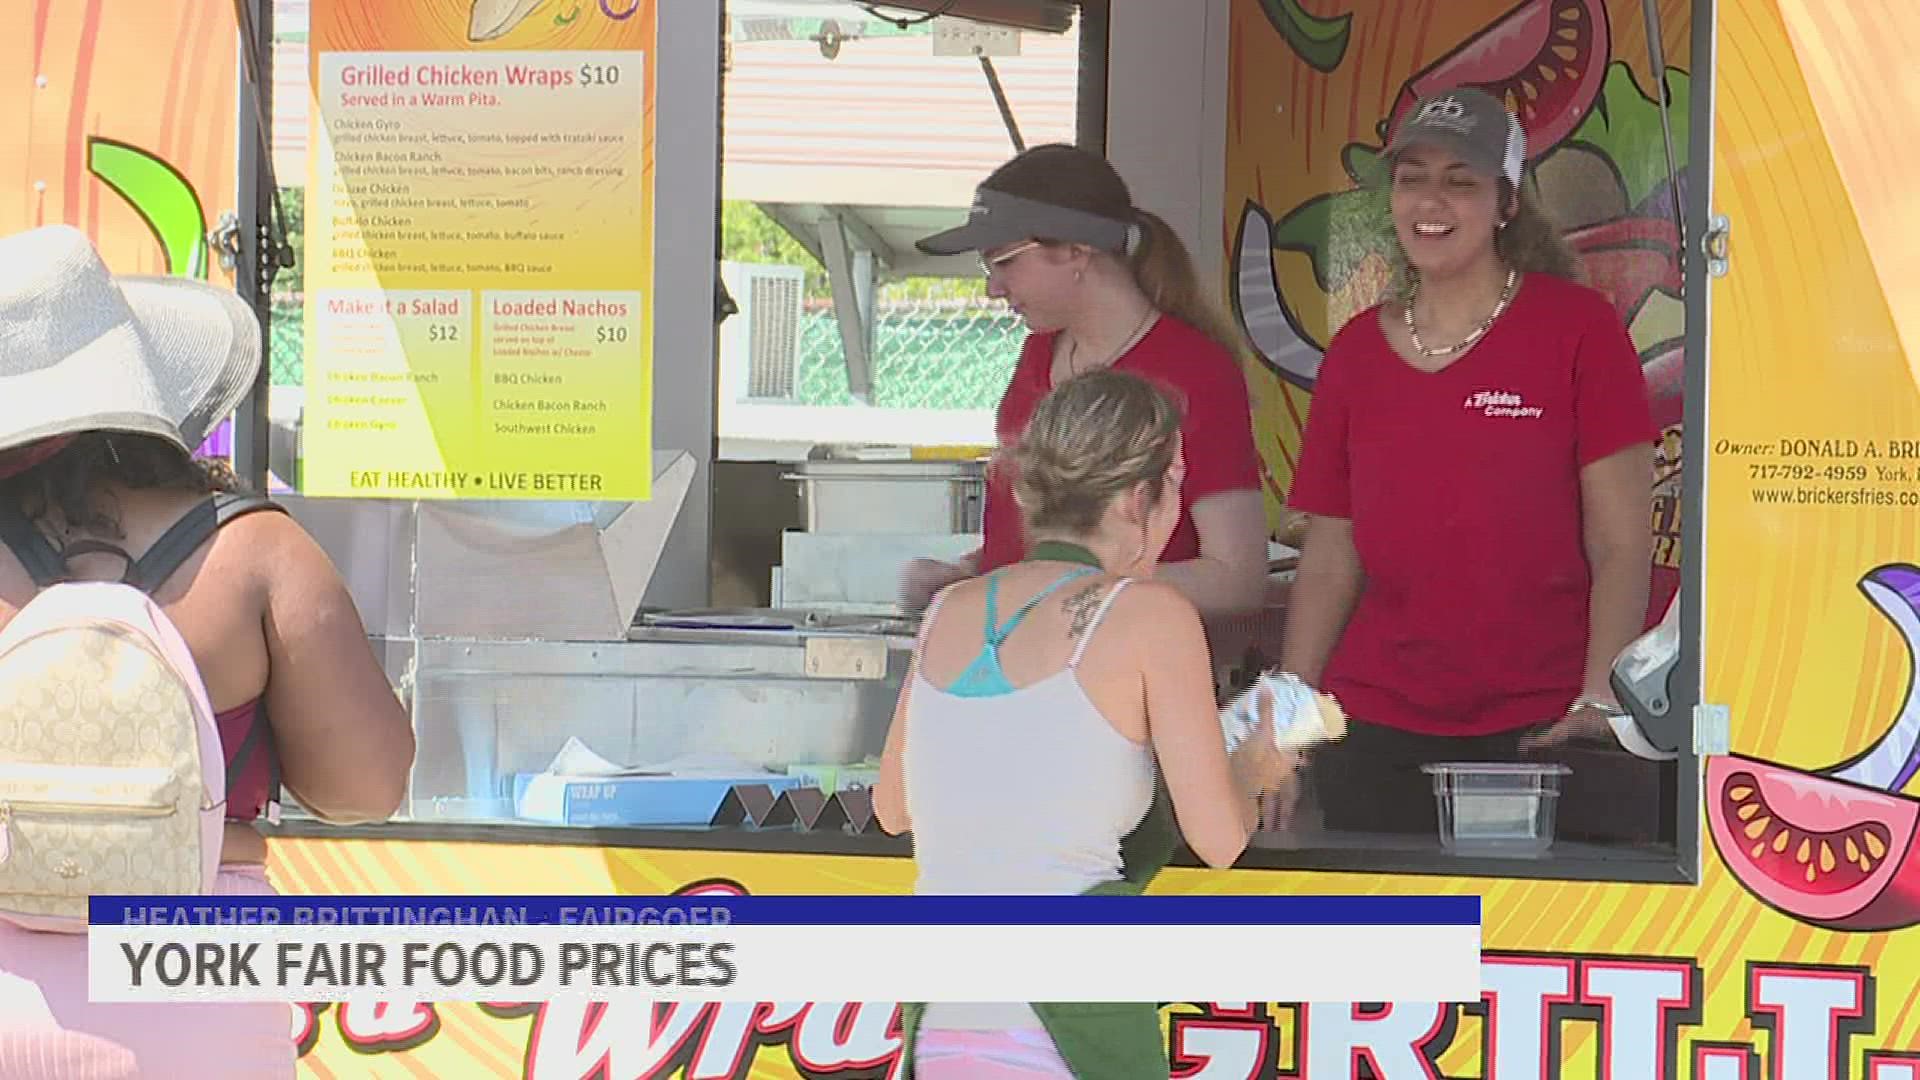 Fairgoers observe stable food prices at food stands from previous years